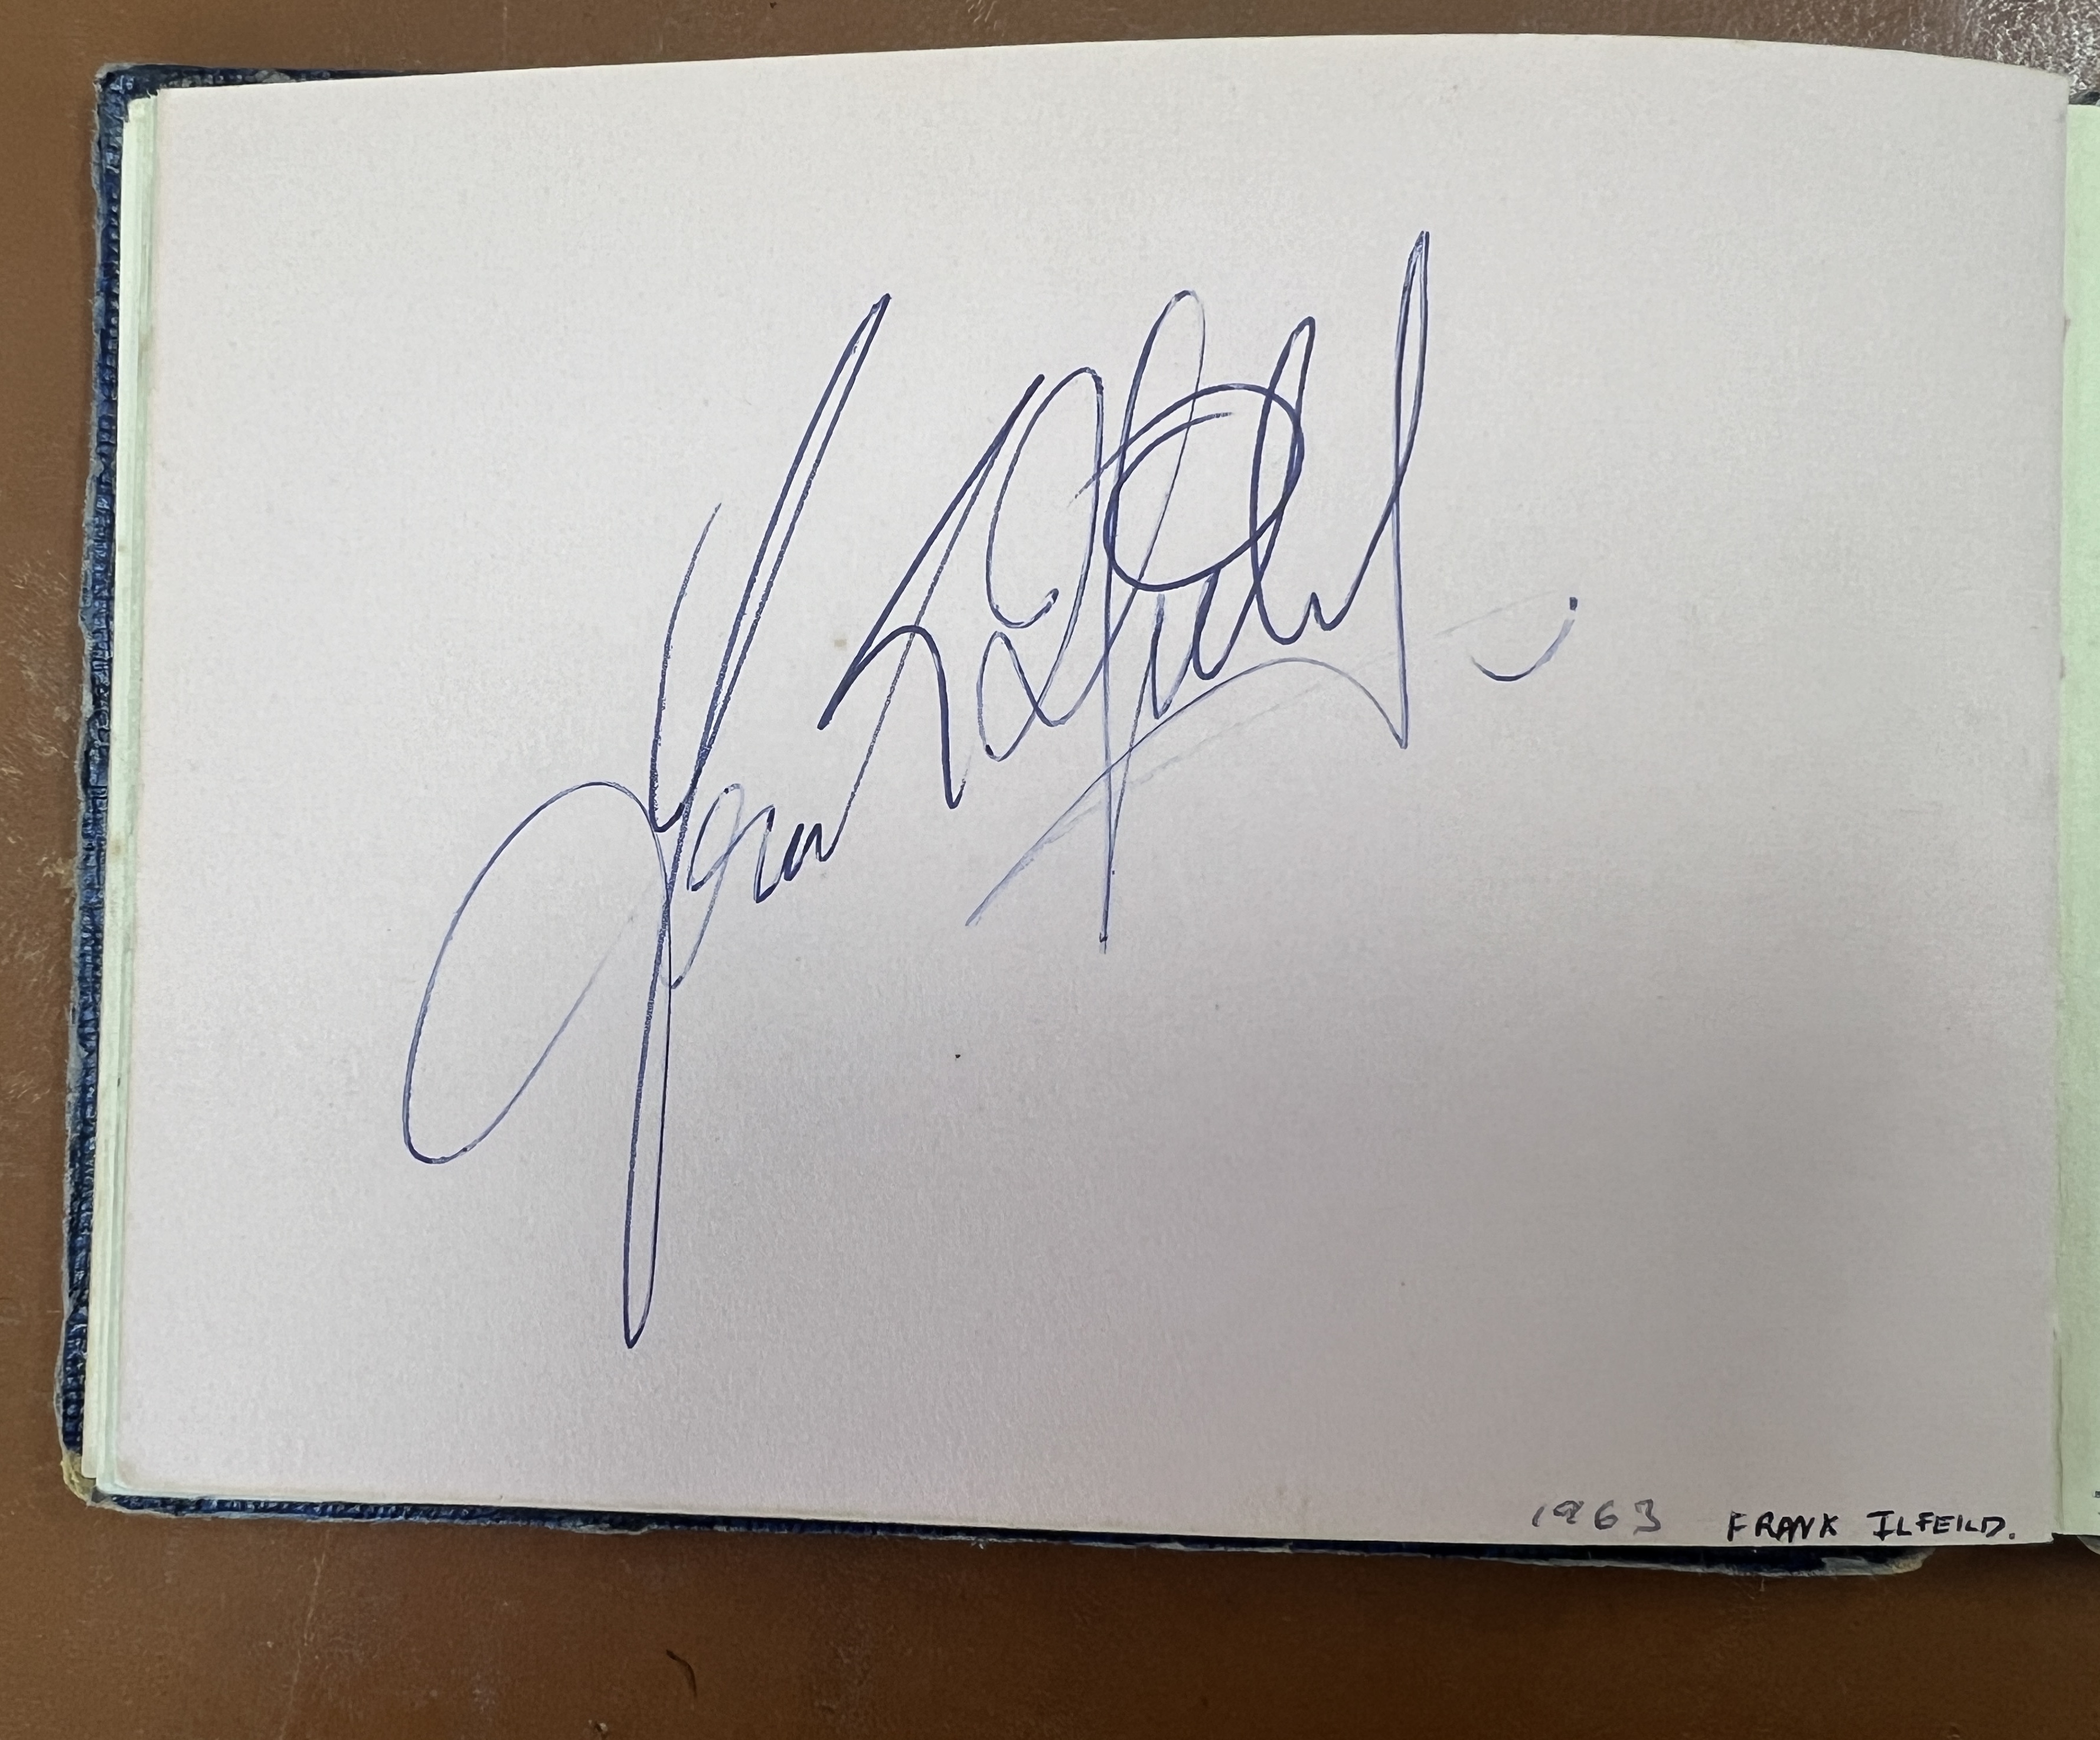 A 1960's autograph album containing autographs of various celebrities including Cliff Richard, - Image 29 of 37